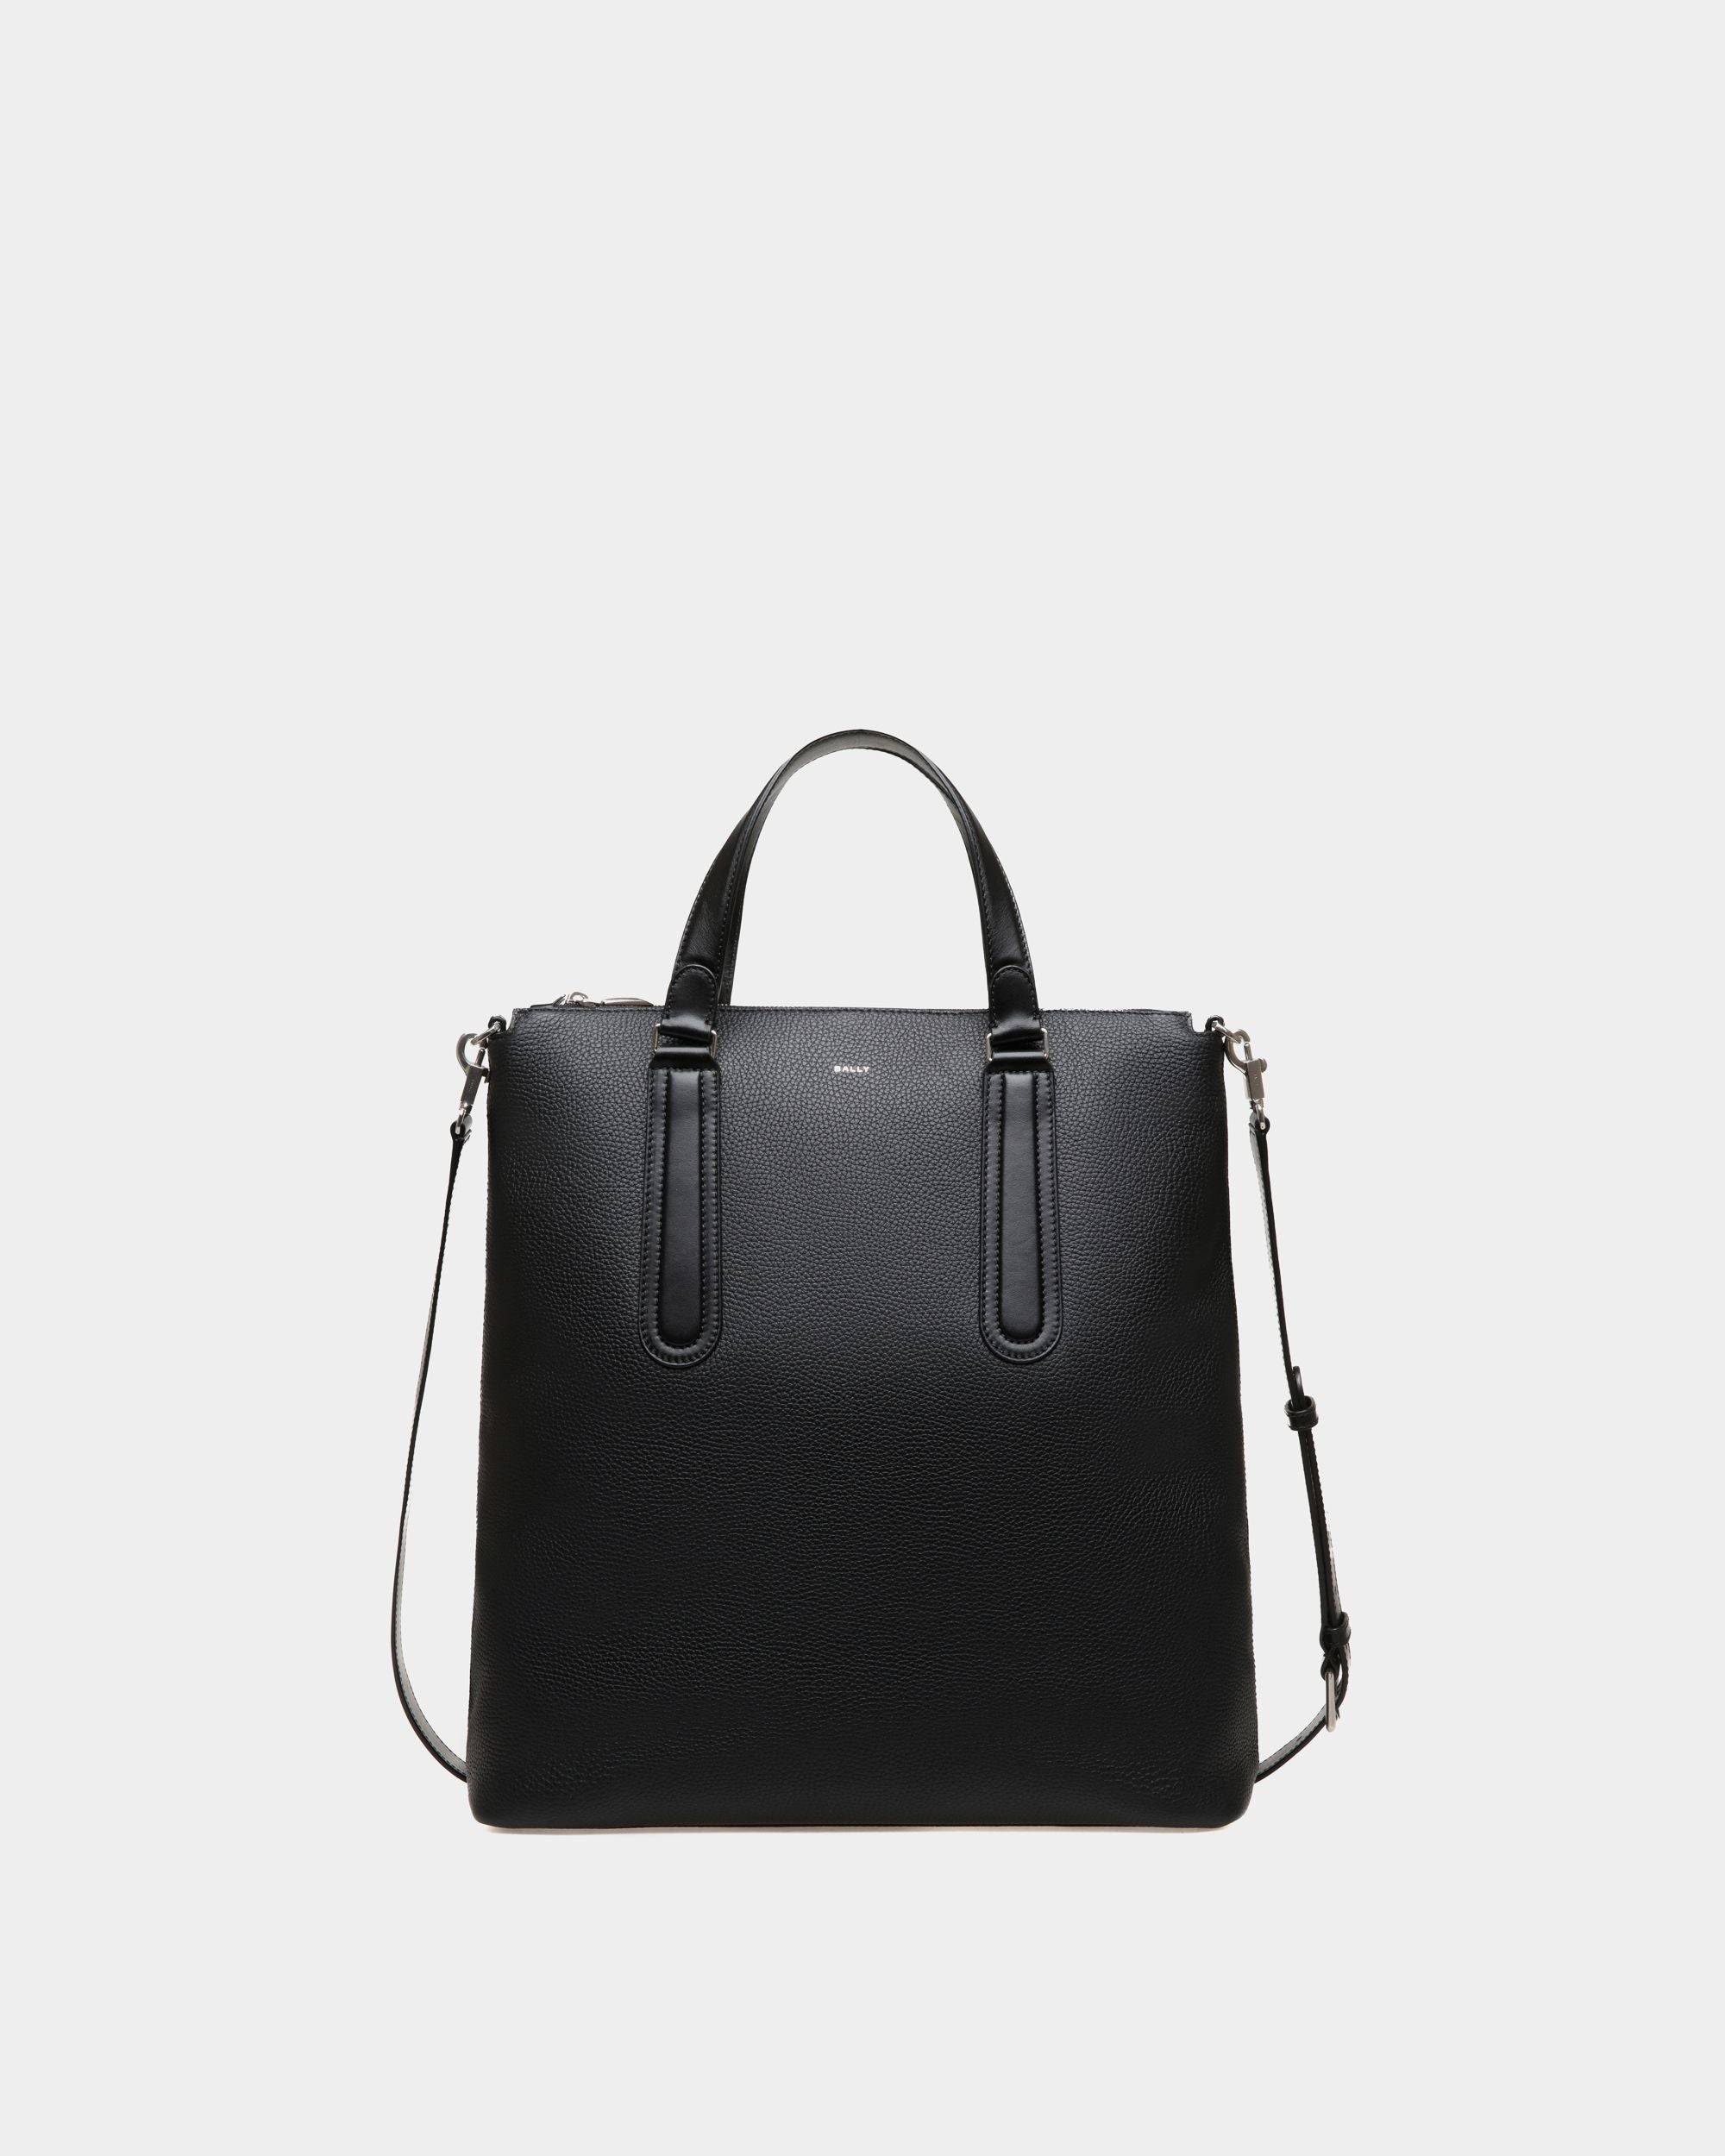 Men's Spin Tote in Black Grained Leather | Bally | Still Life Front